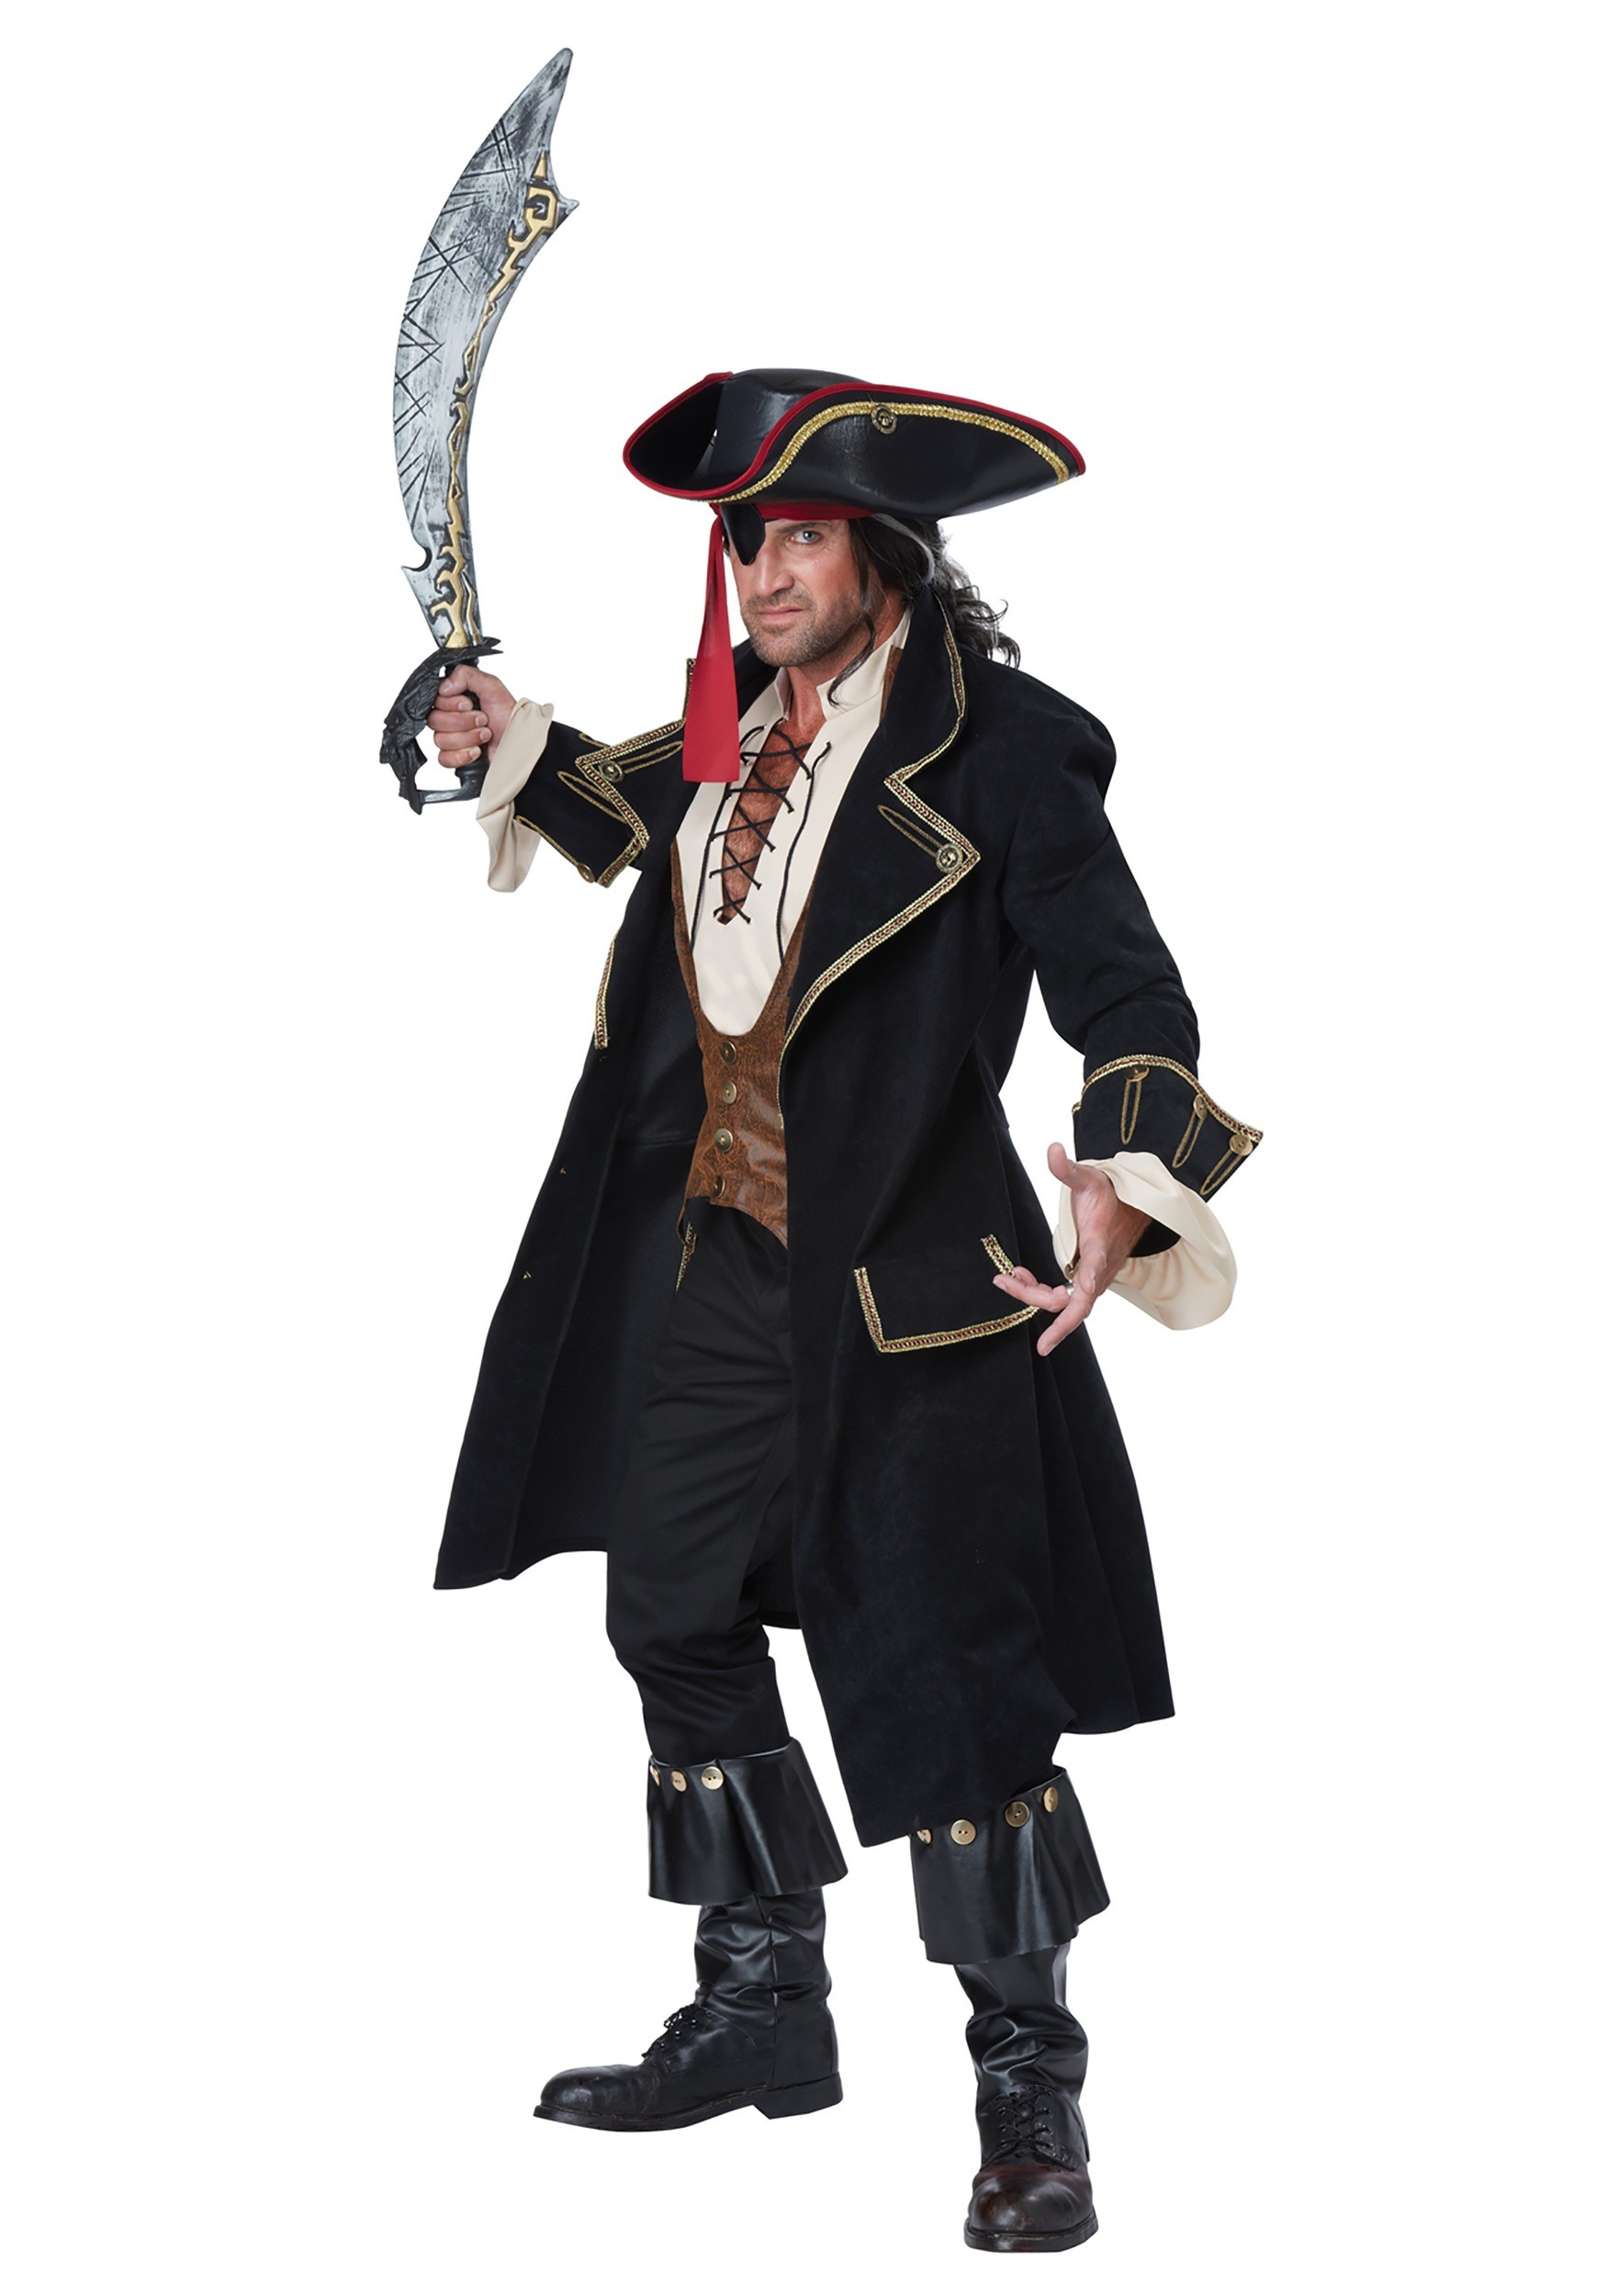 https://images.halloweencostumes.ca/products/39951/1-1/adult-deluxe-pirate-captain-costume.jpg